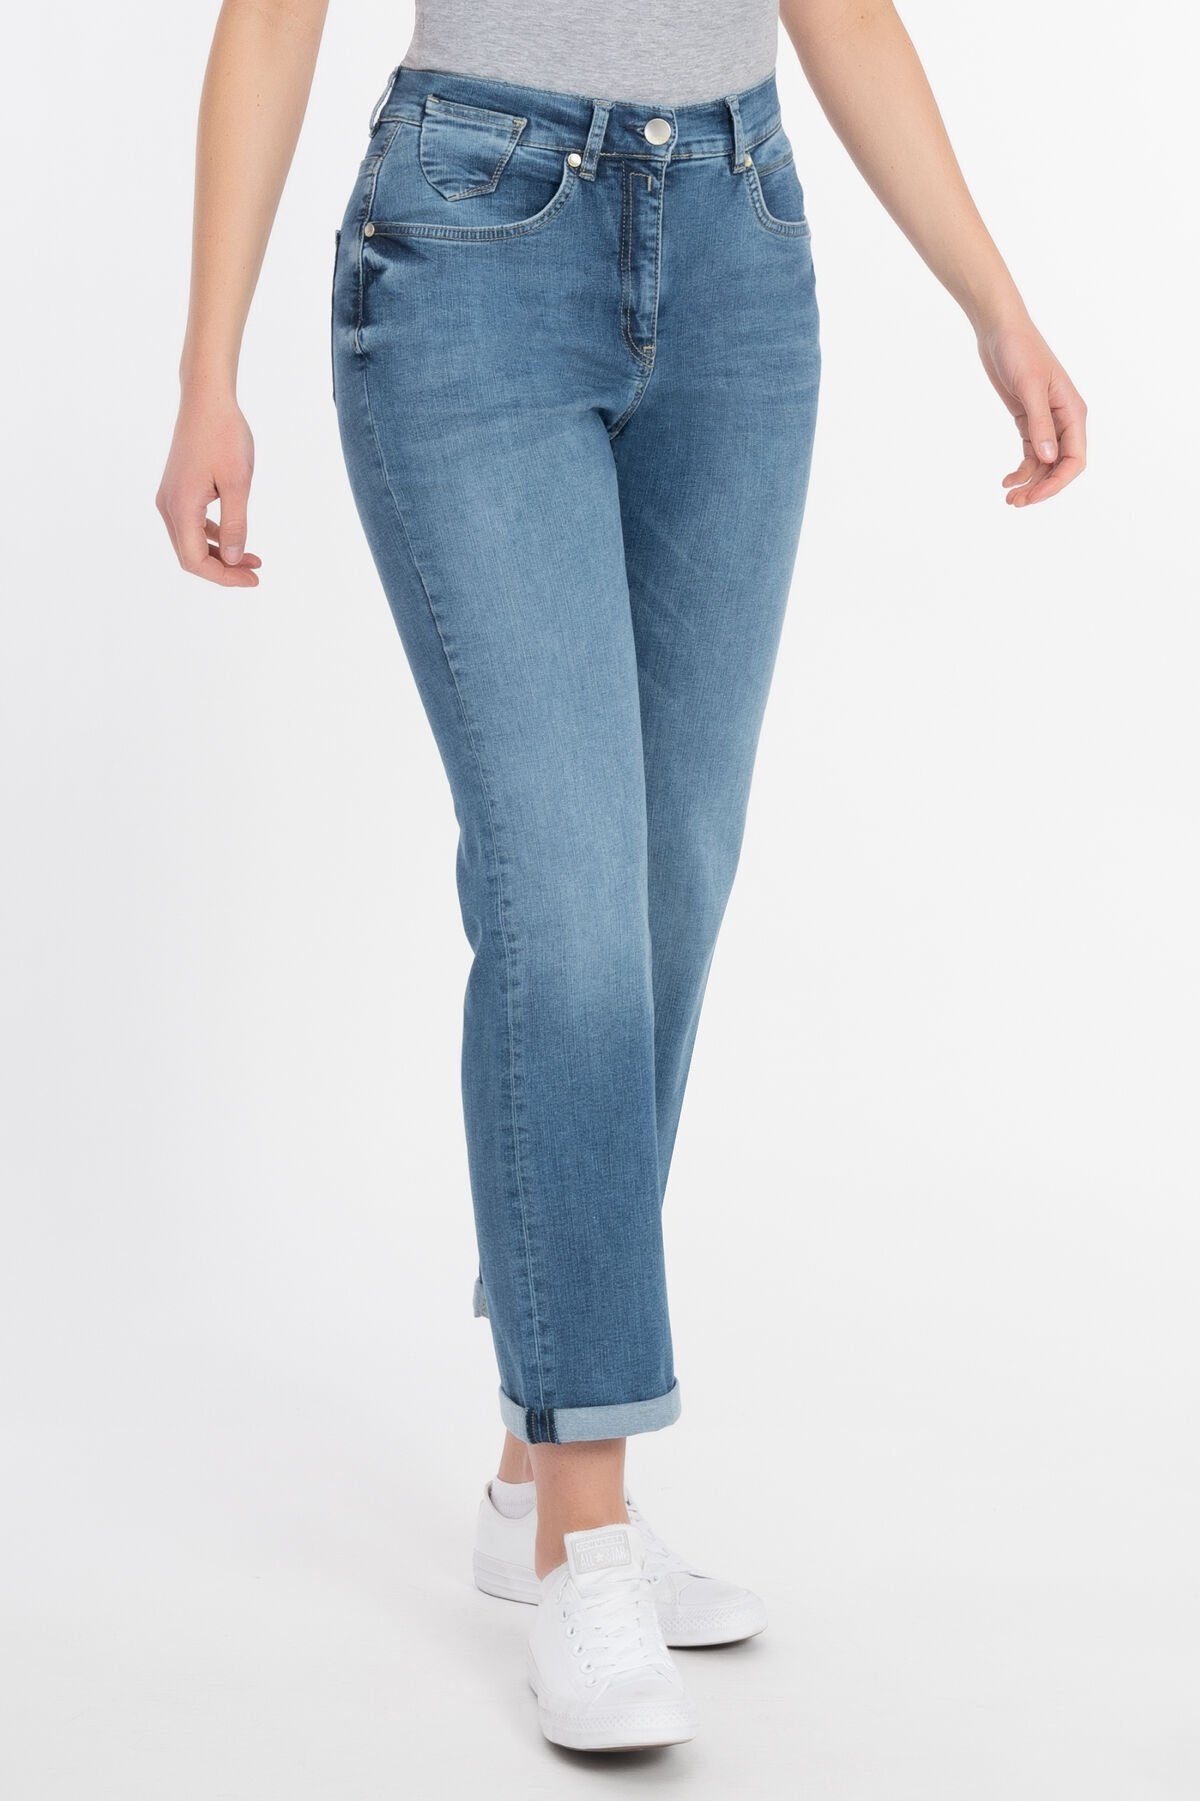 Recover authentischer Hazel in 5-Pocket-Jeans Pants Waschung